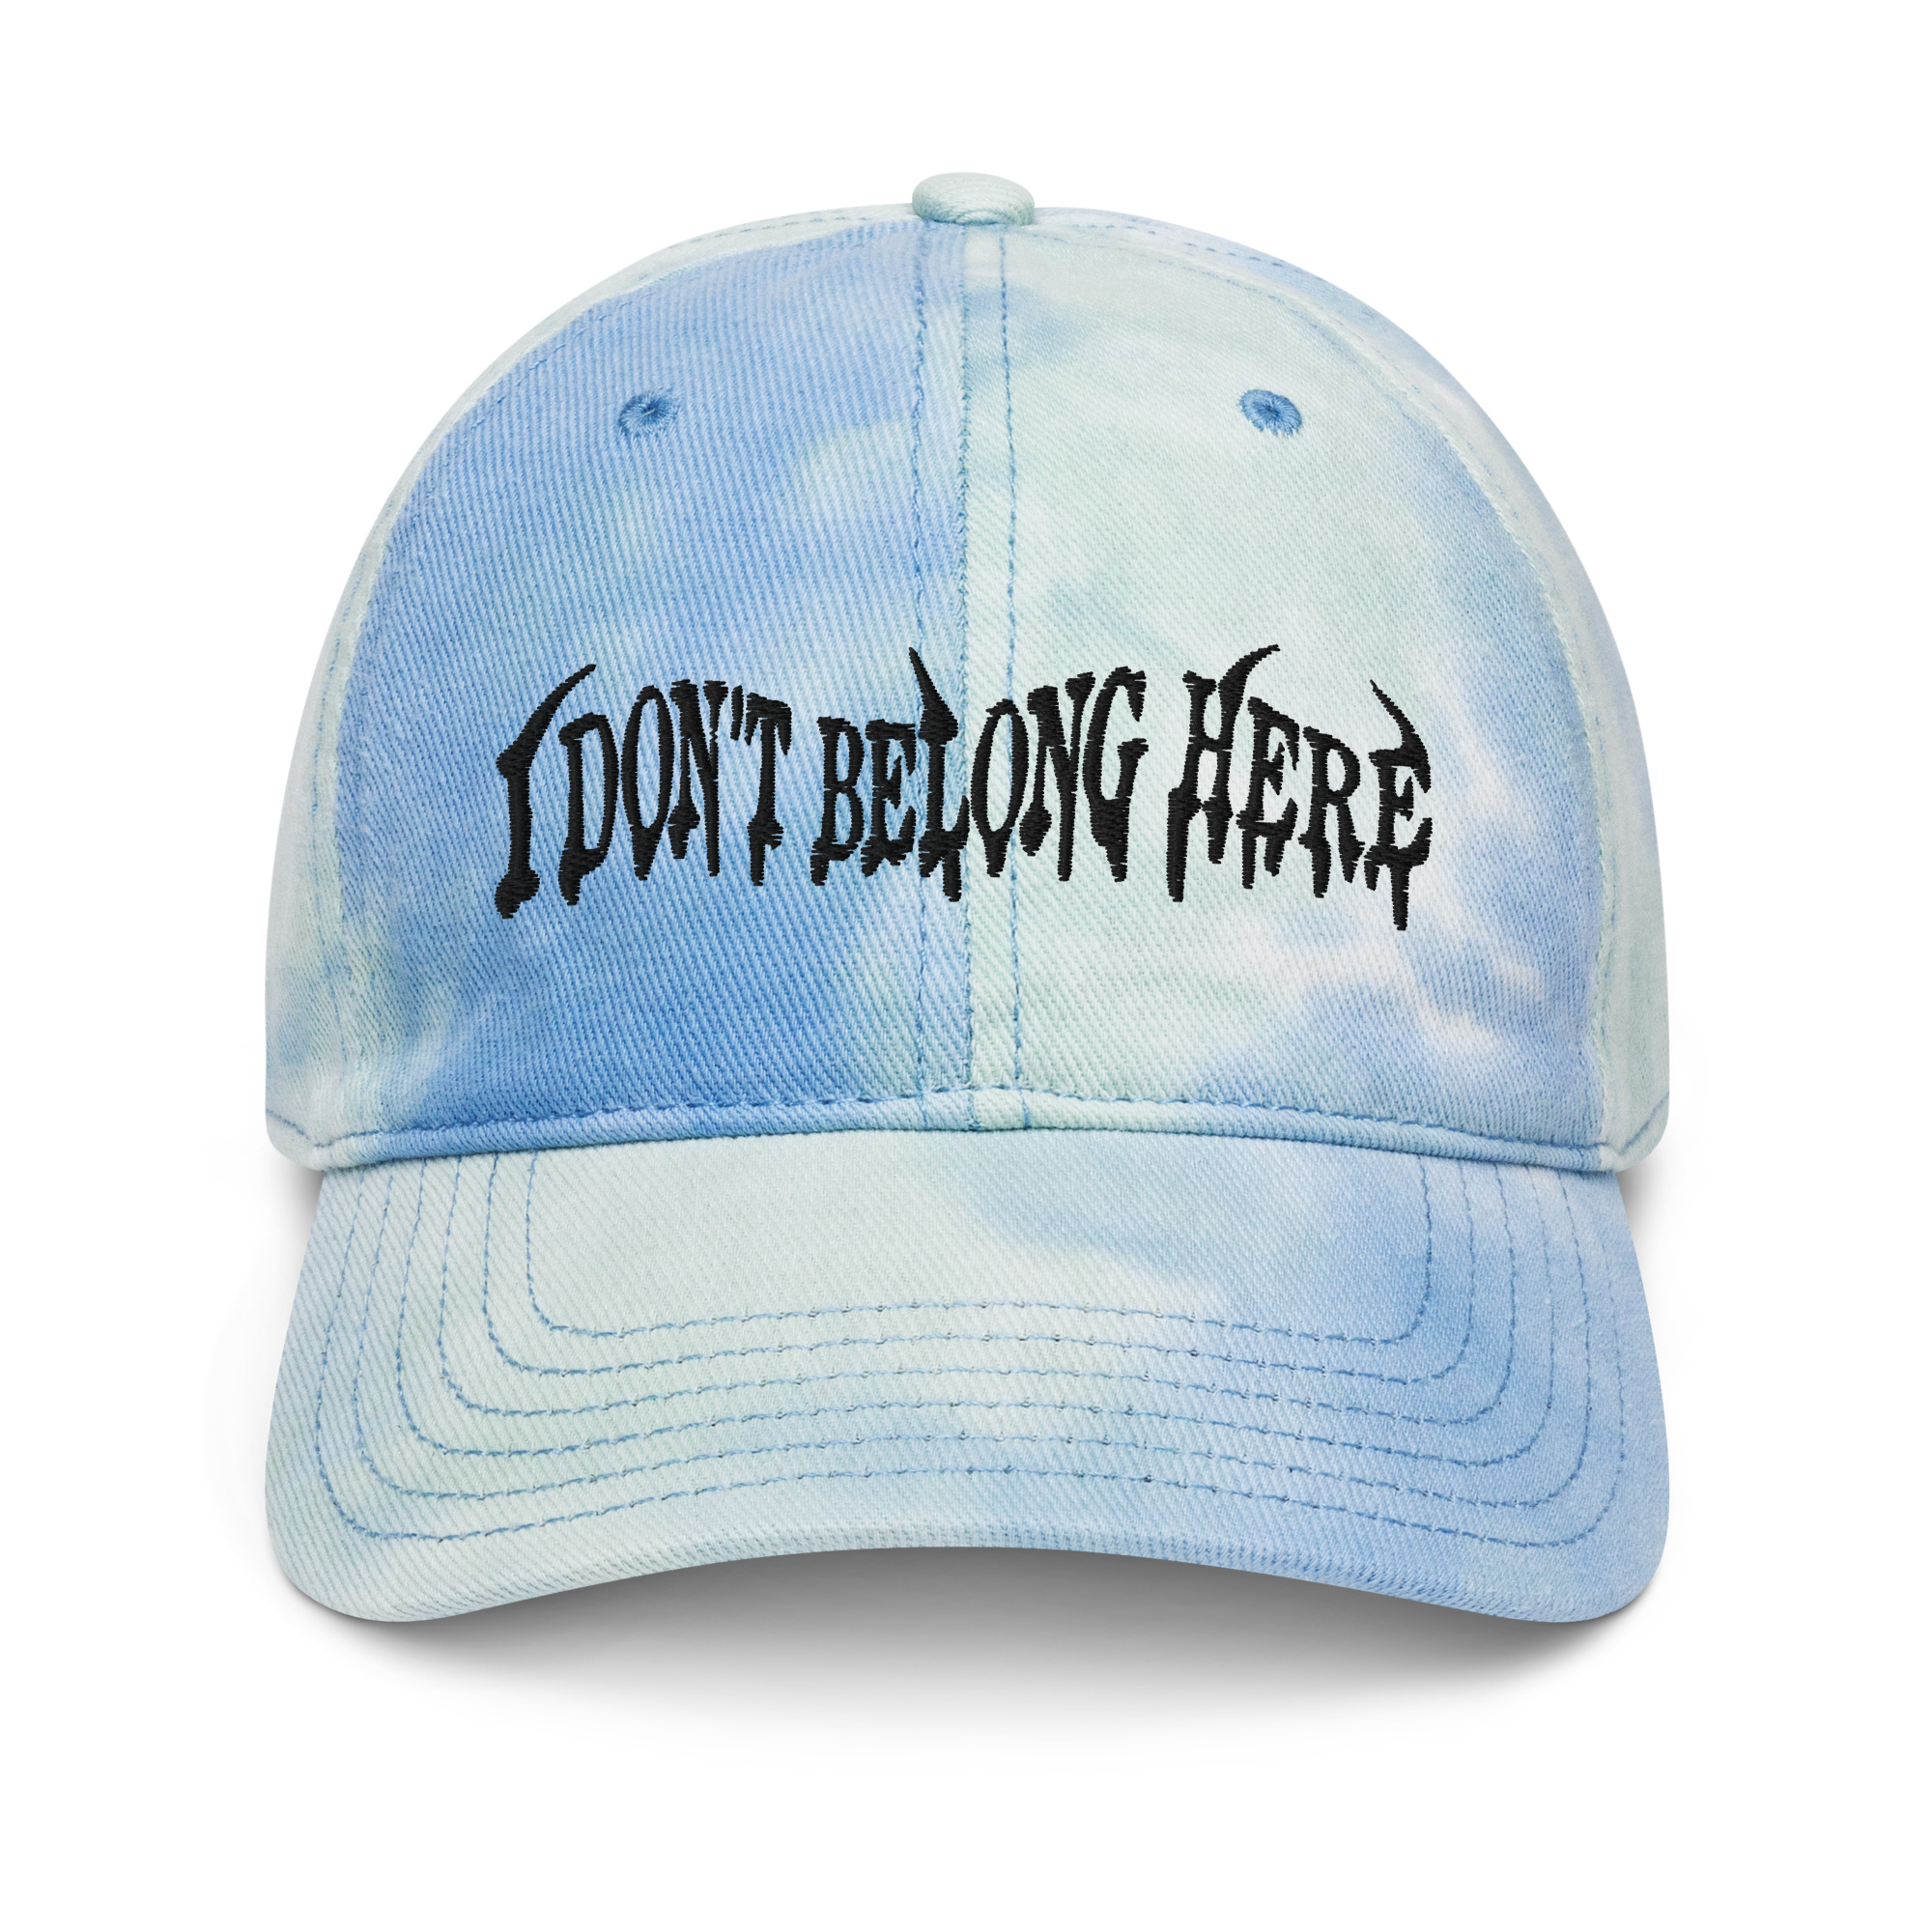 Featured image for “I don’t belong here - Tie dye hat”